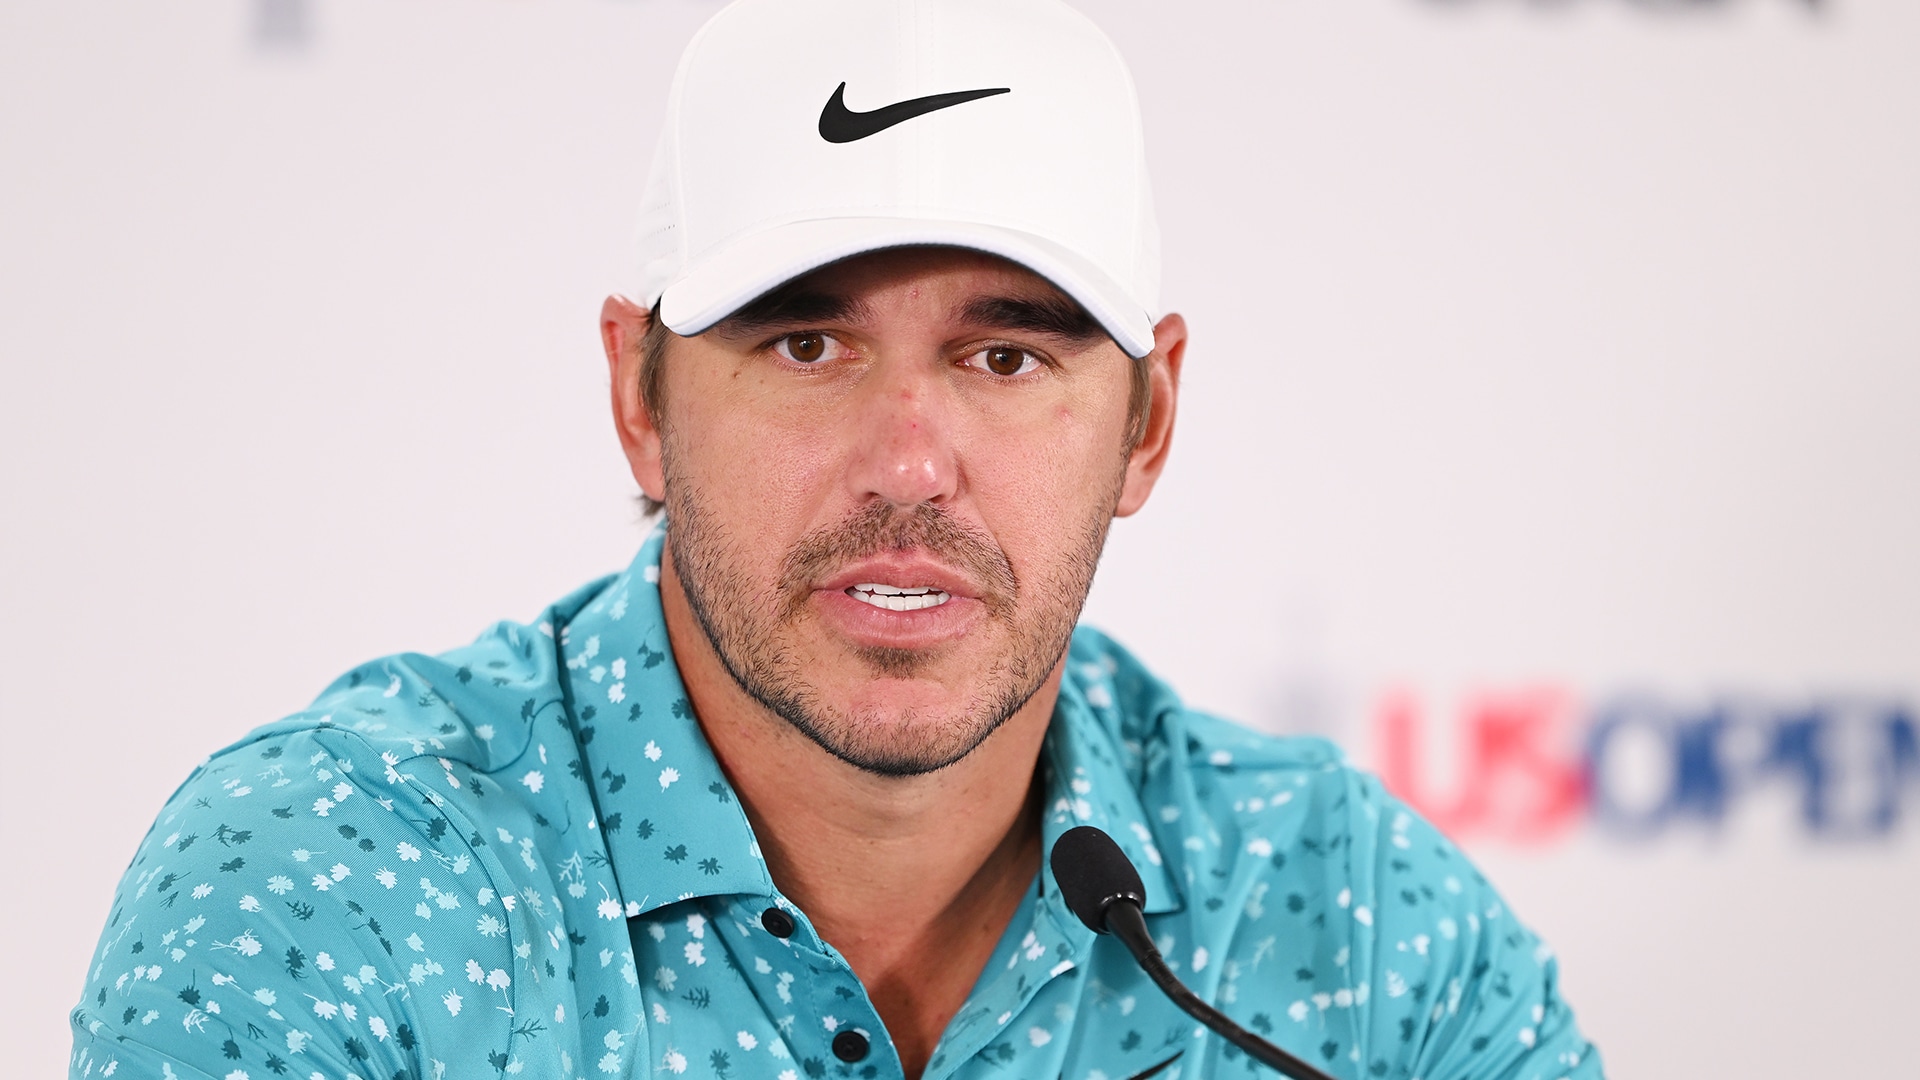 2023 U.S. Open: Thriving on chaos, Brooks Koepka doesn’t think 10 major wins ‘out of the question’